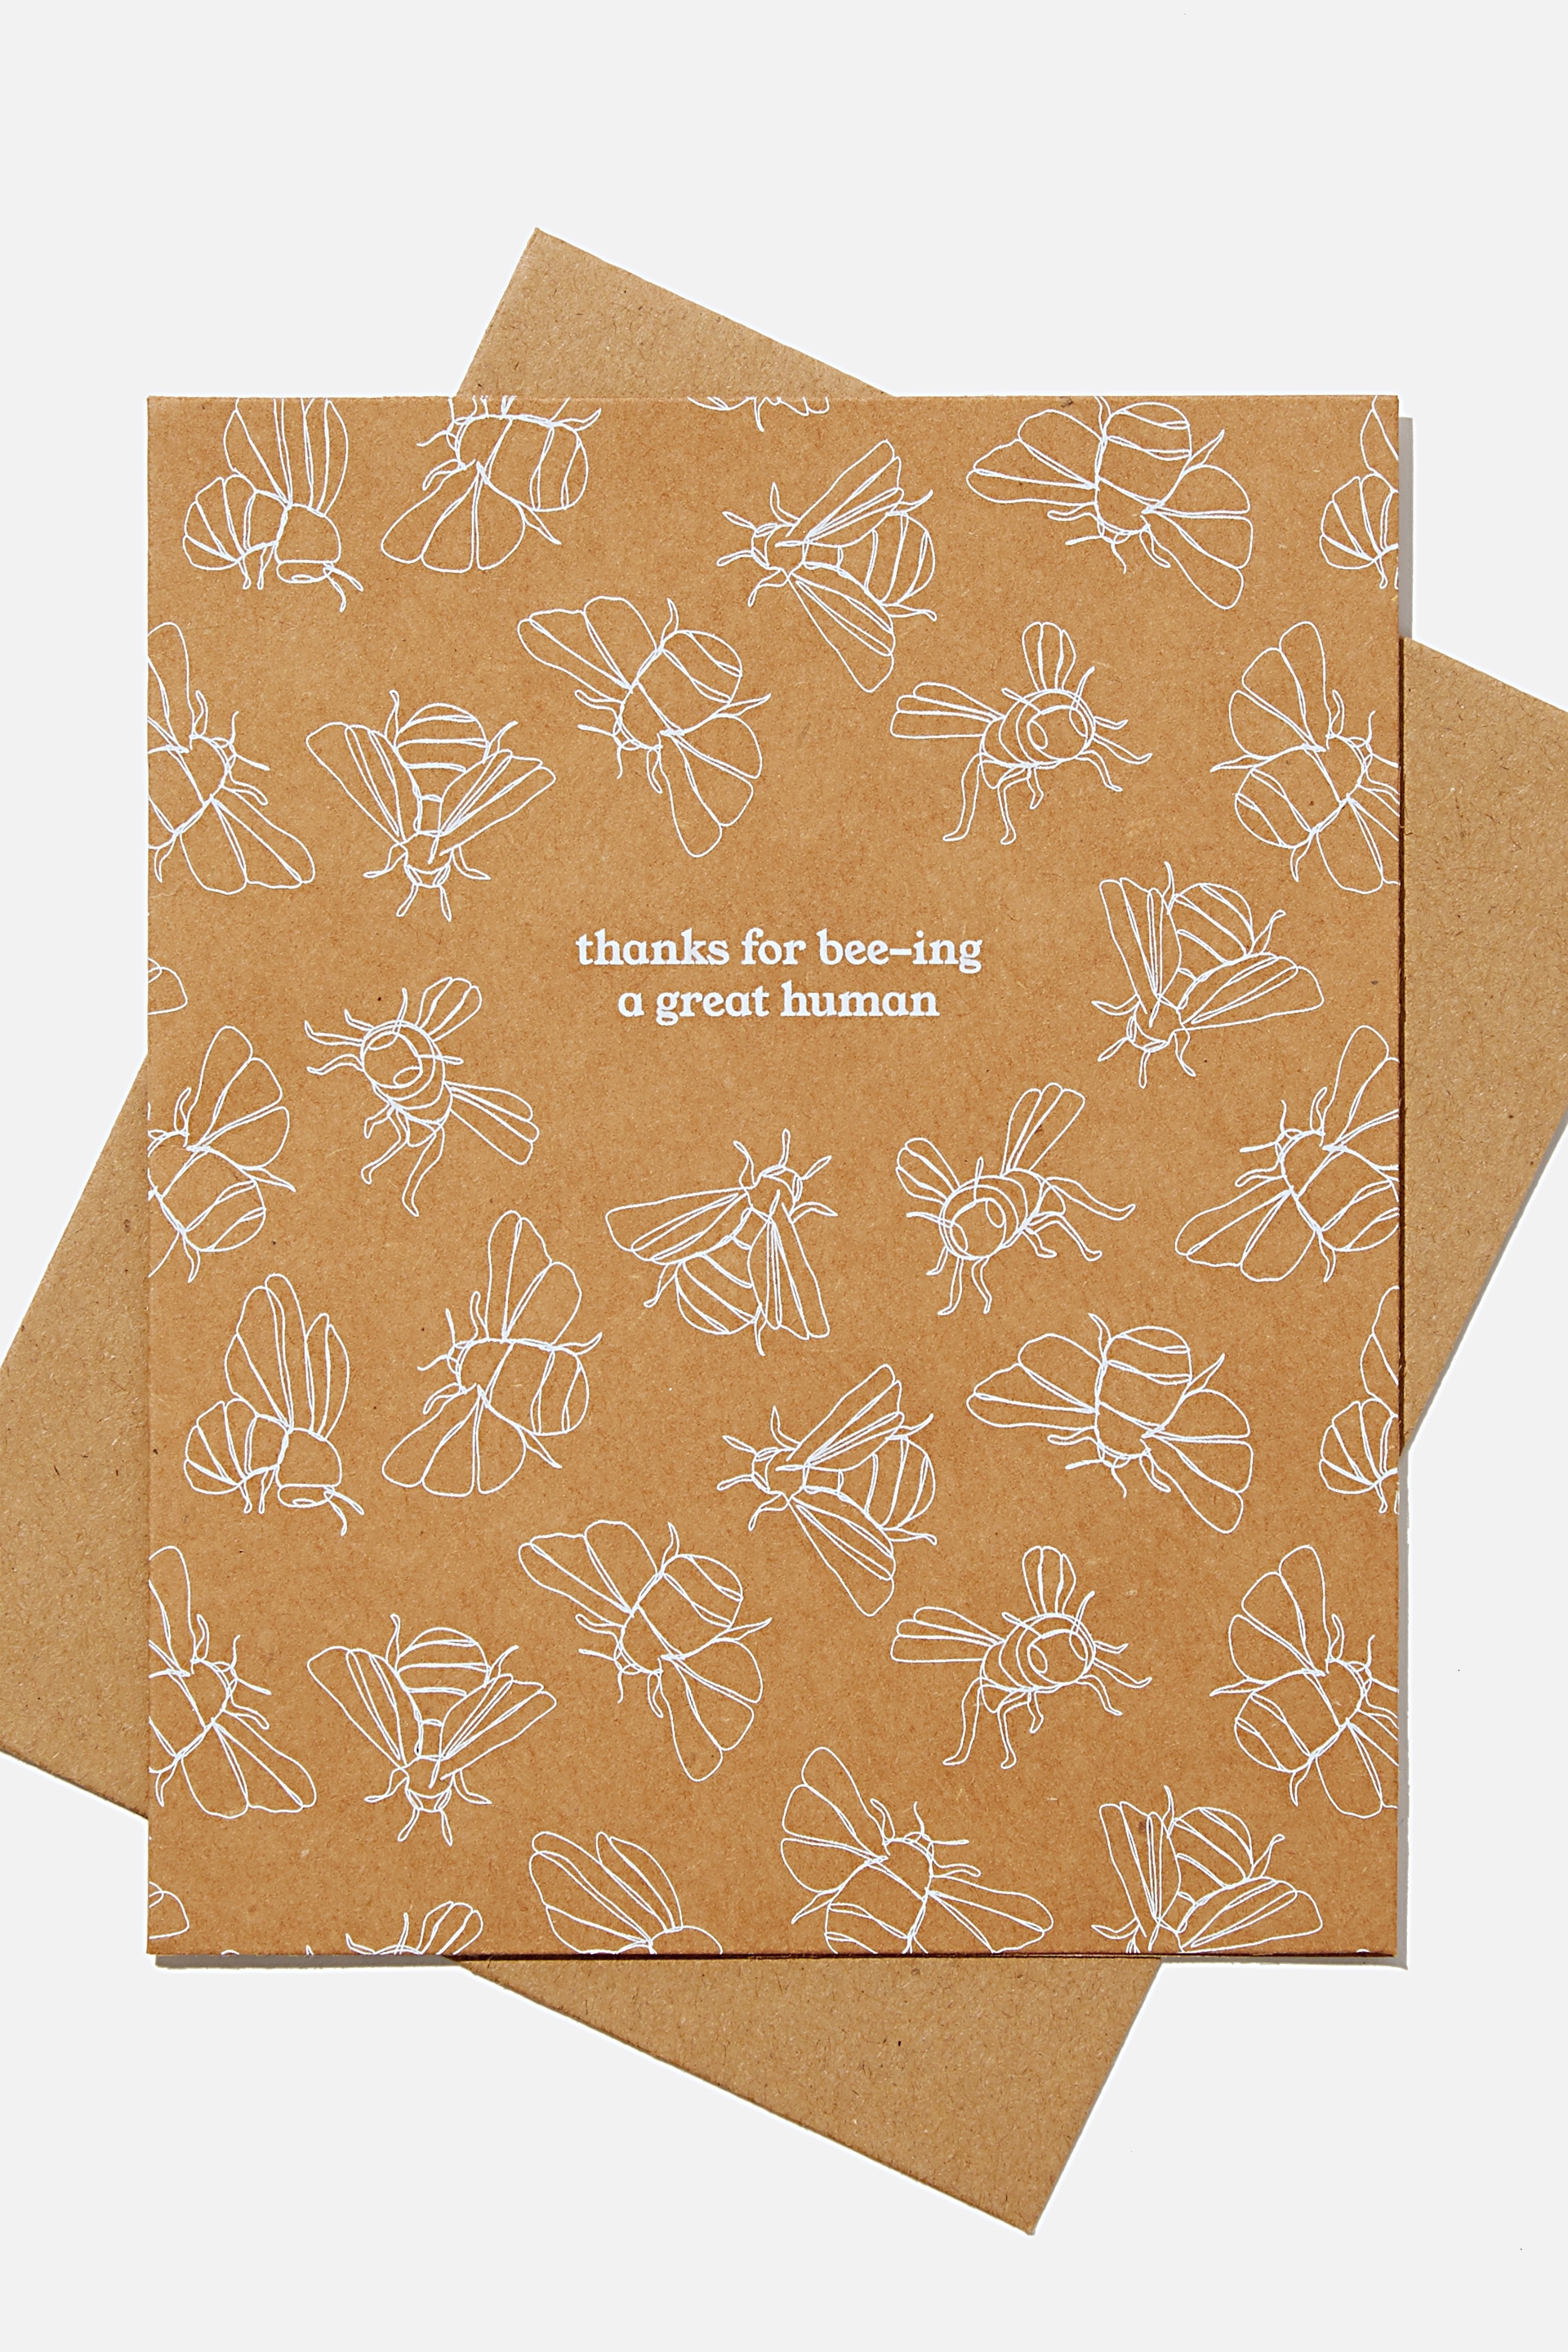 Typo - Thank You Card - Beeing a great human